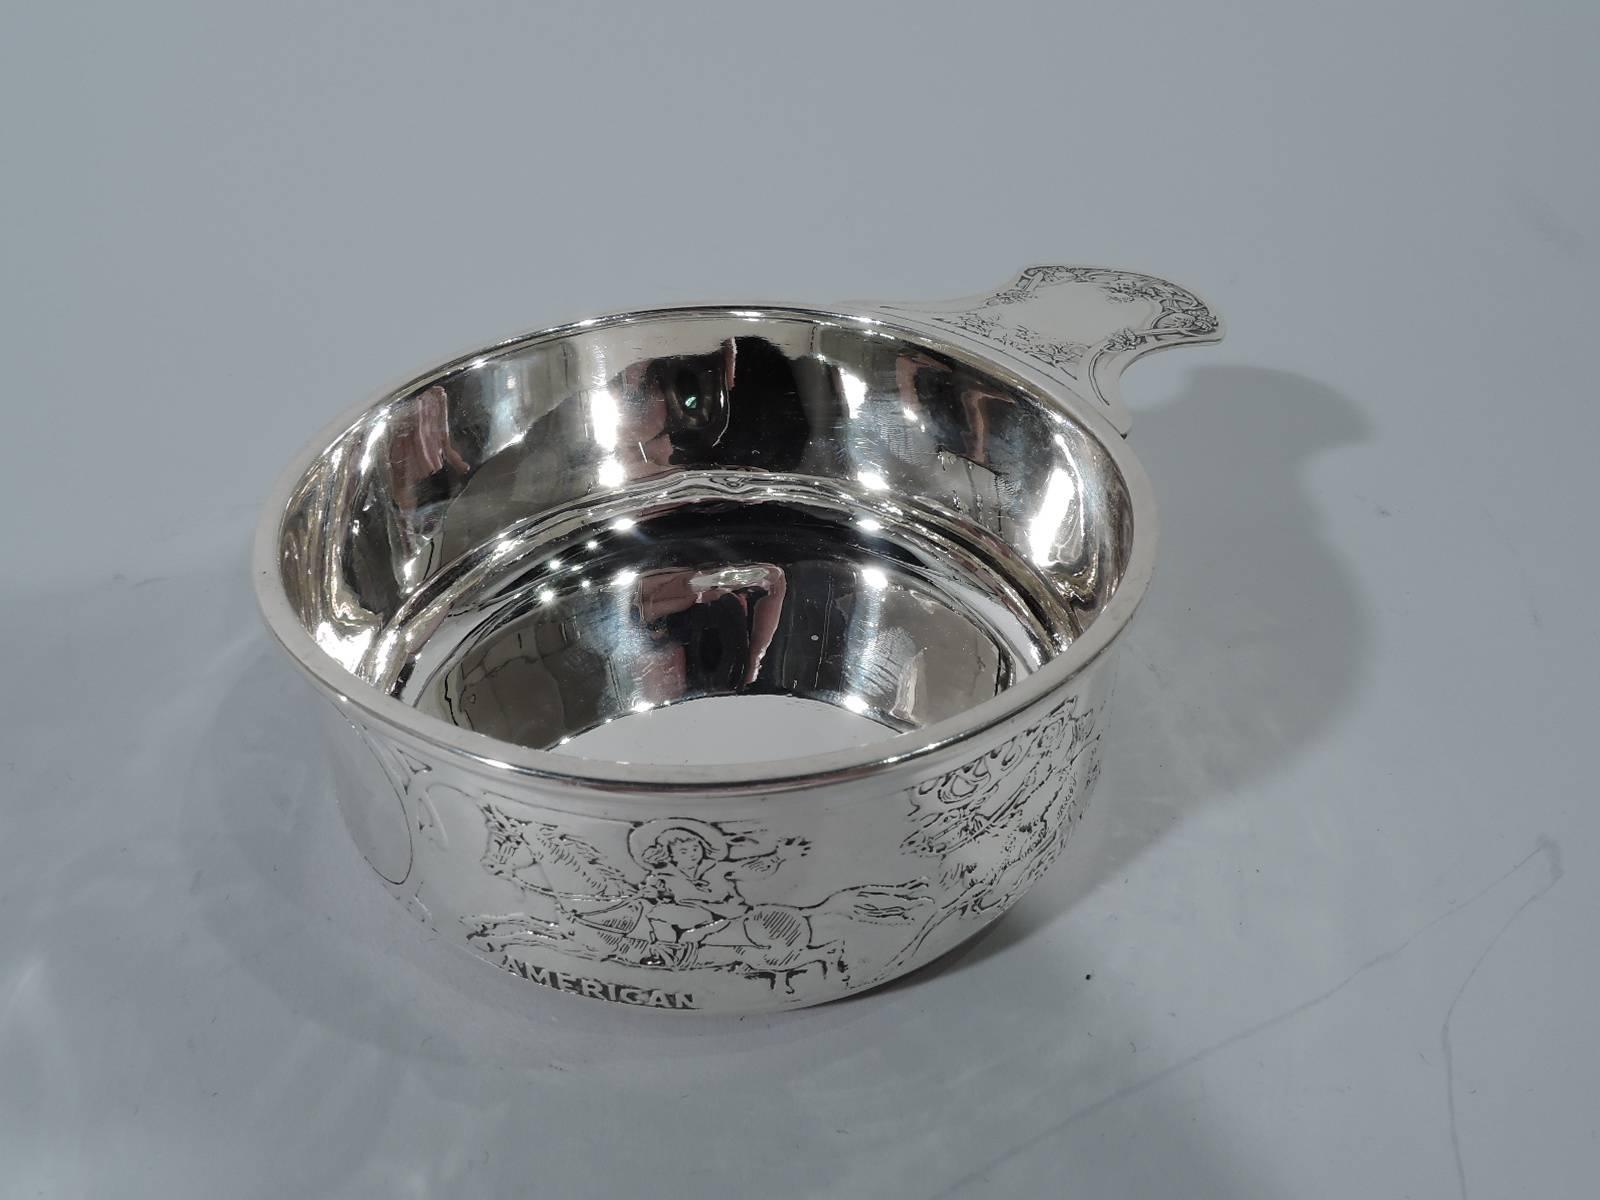 Sterling silver children of the world porringer. Made by Kerr in Newark, circa 1910. Slightly upward tapering sides, molded rim and solid waisted handle. On exterior is acid-etched frieze of children riding animals, including a horse, reindeer,